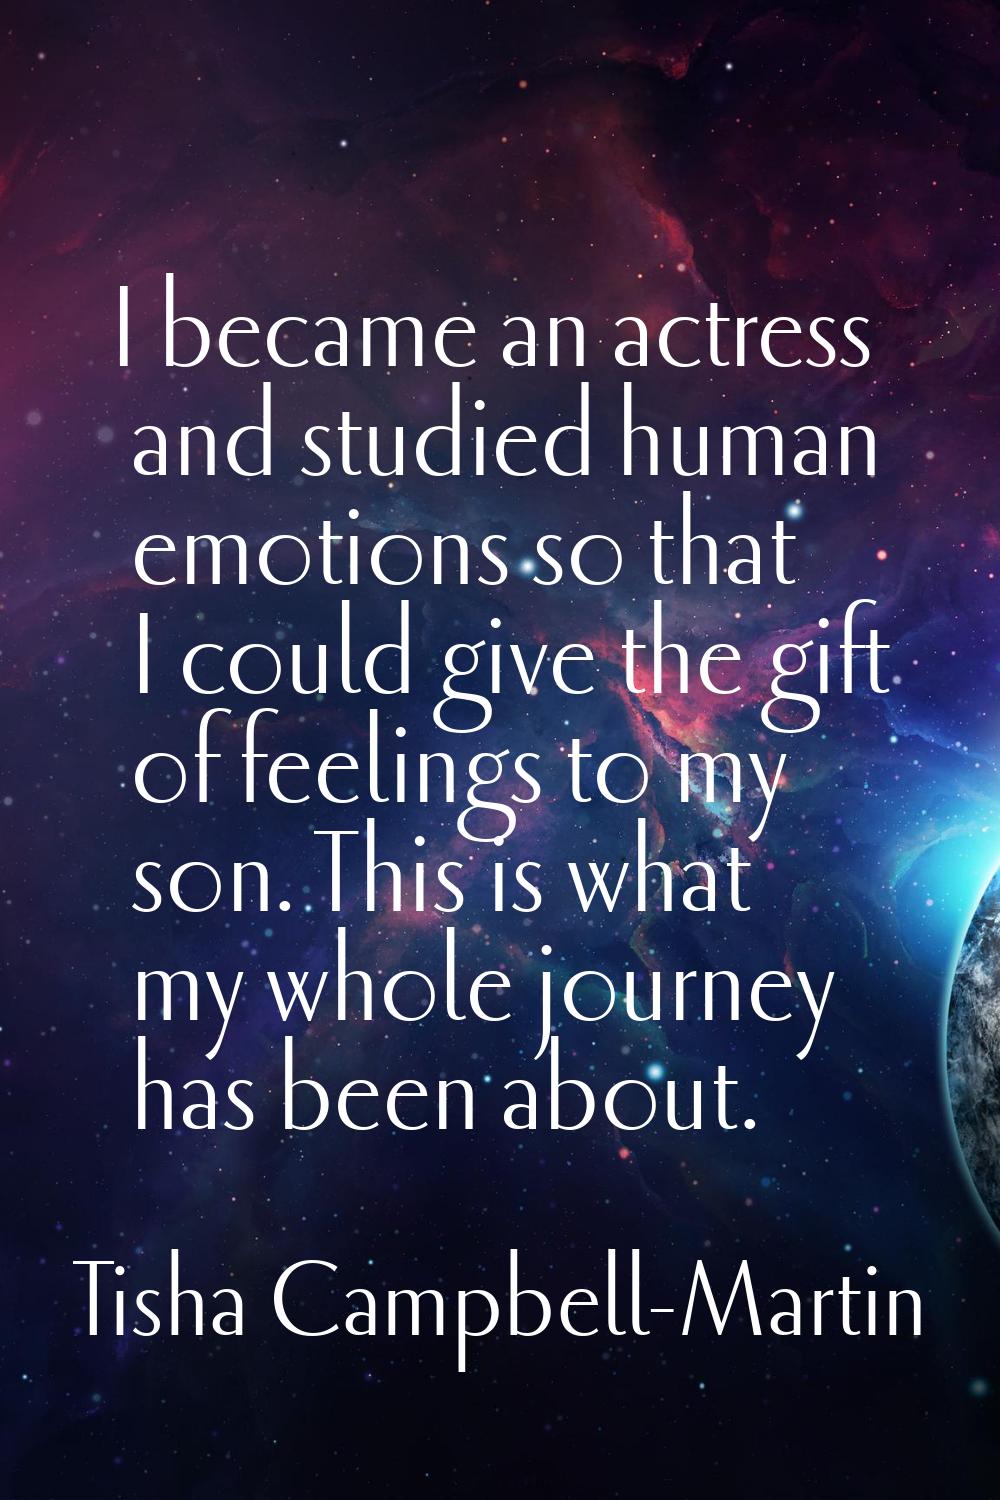 I became an actress and studied human emotions so that I could give the gift of feelings to my son.